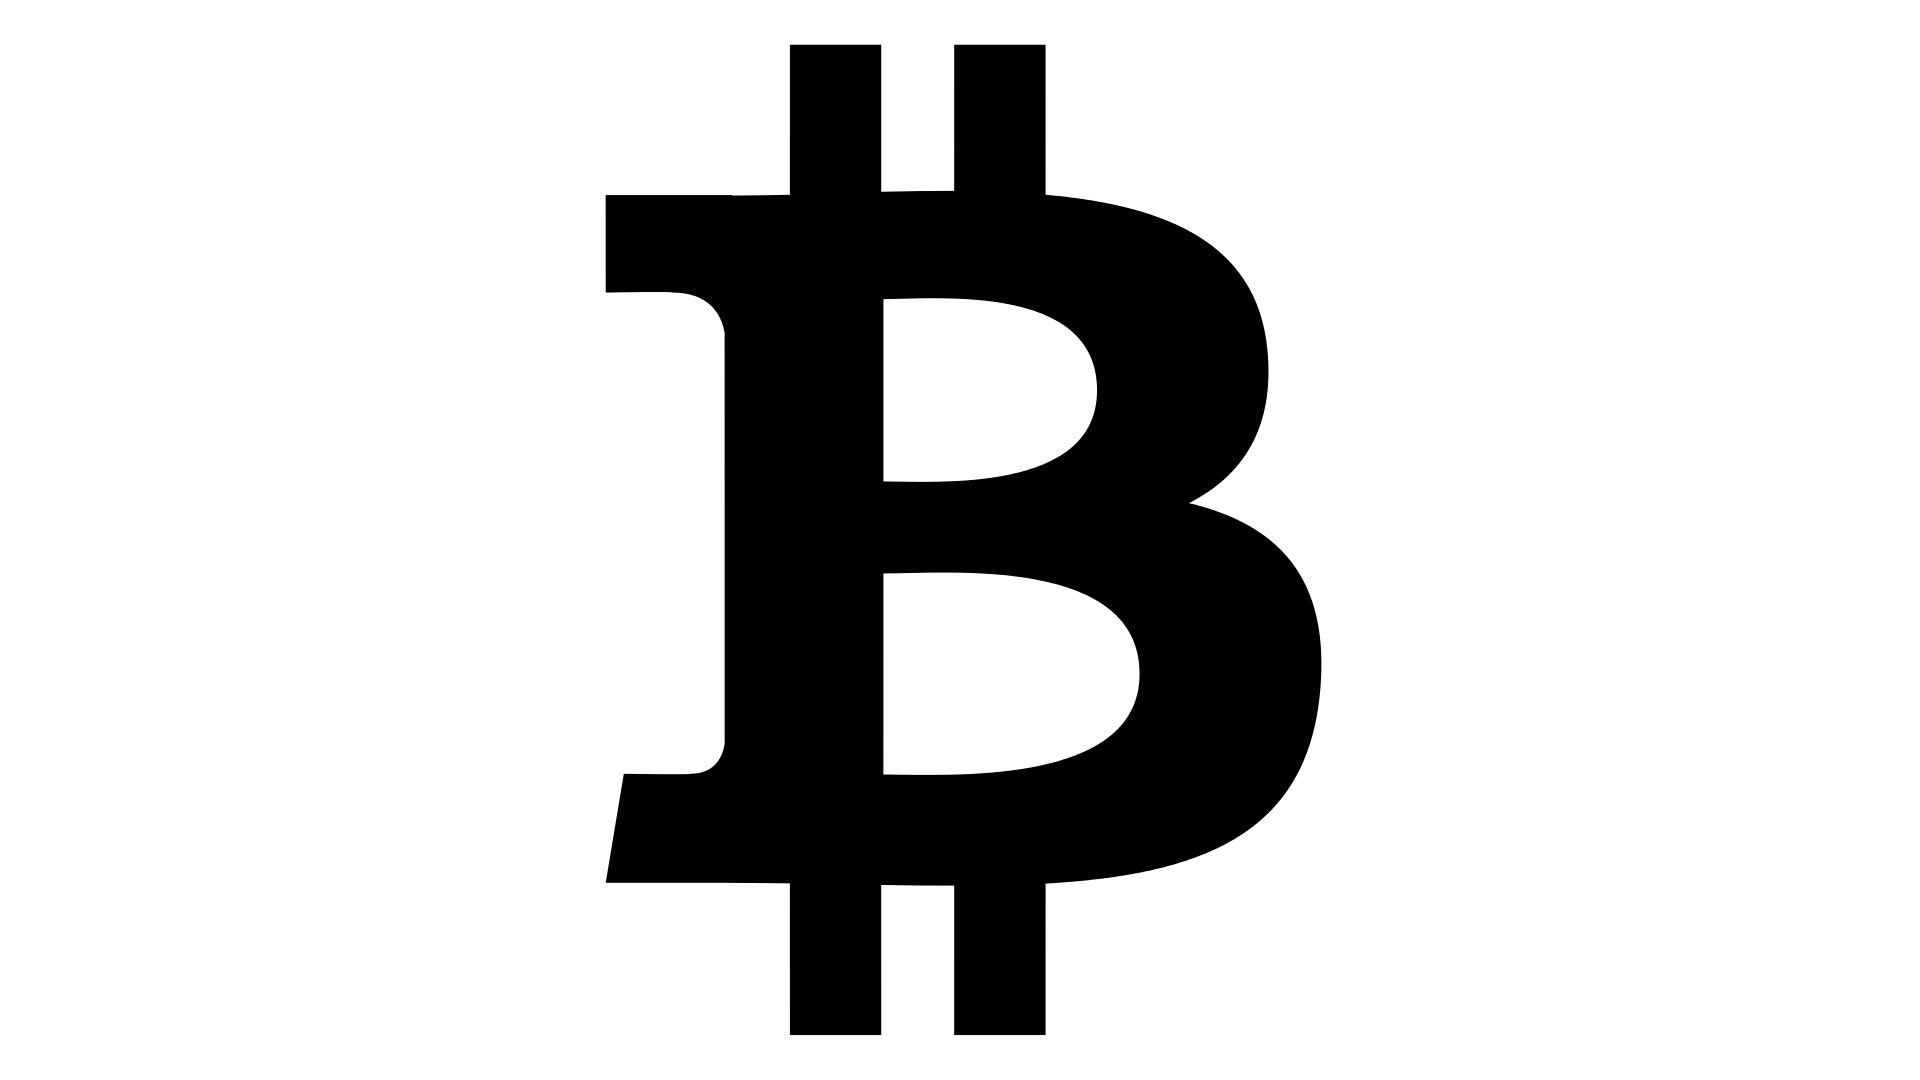 Official Bitcoin Logo - Bitcoin Logo, Bitcoin Symbol, Meaning, History and Evolution